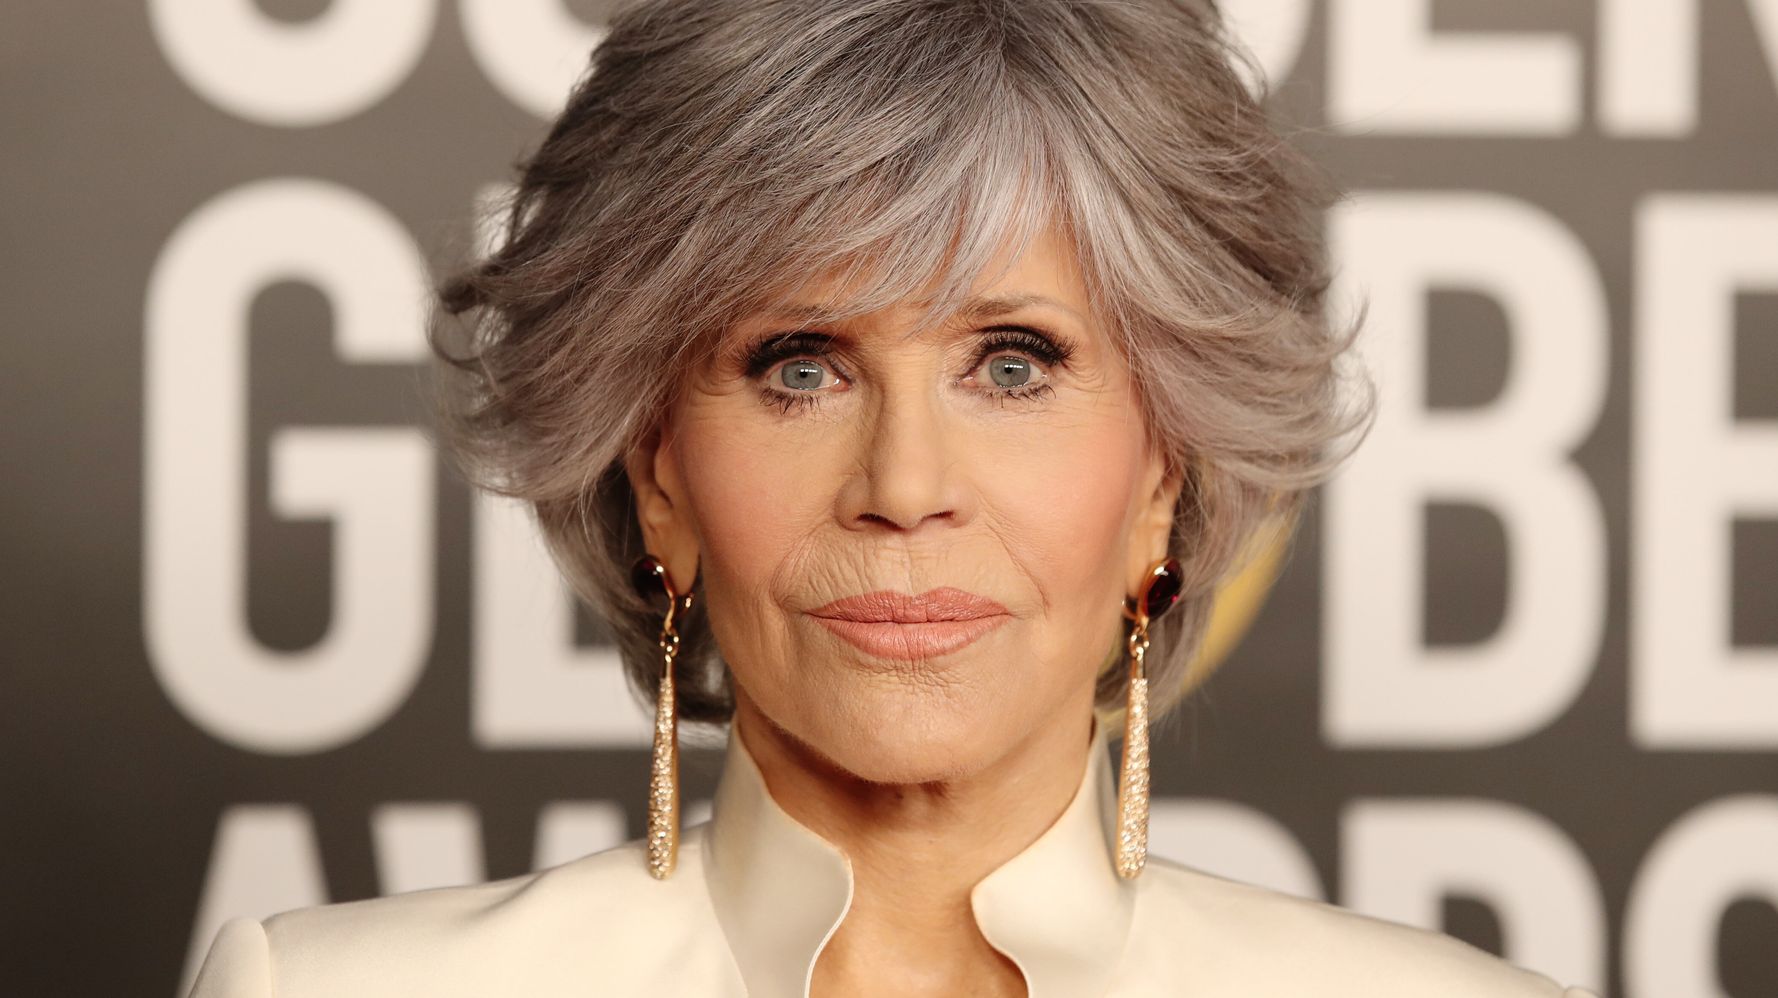 Jane Fonda Swears Out Of ‘Sexual’ Relationships: ‘I Don’t Have That Desire’